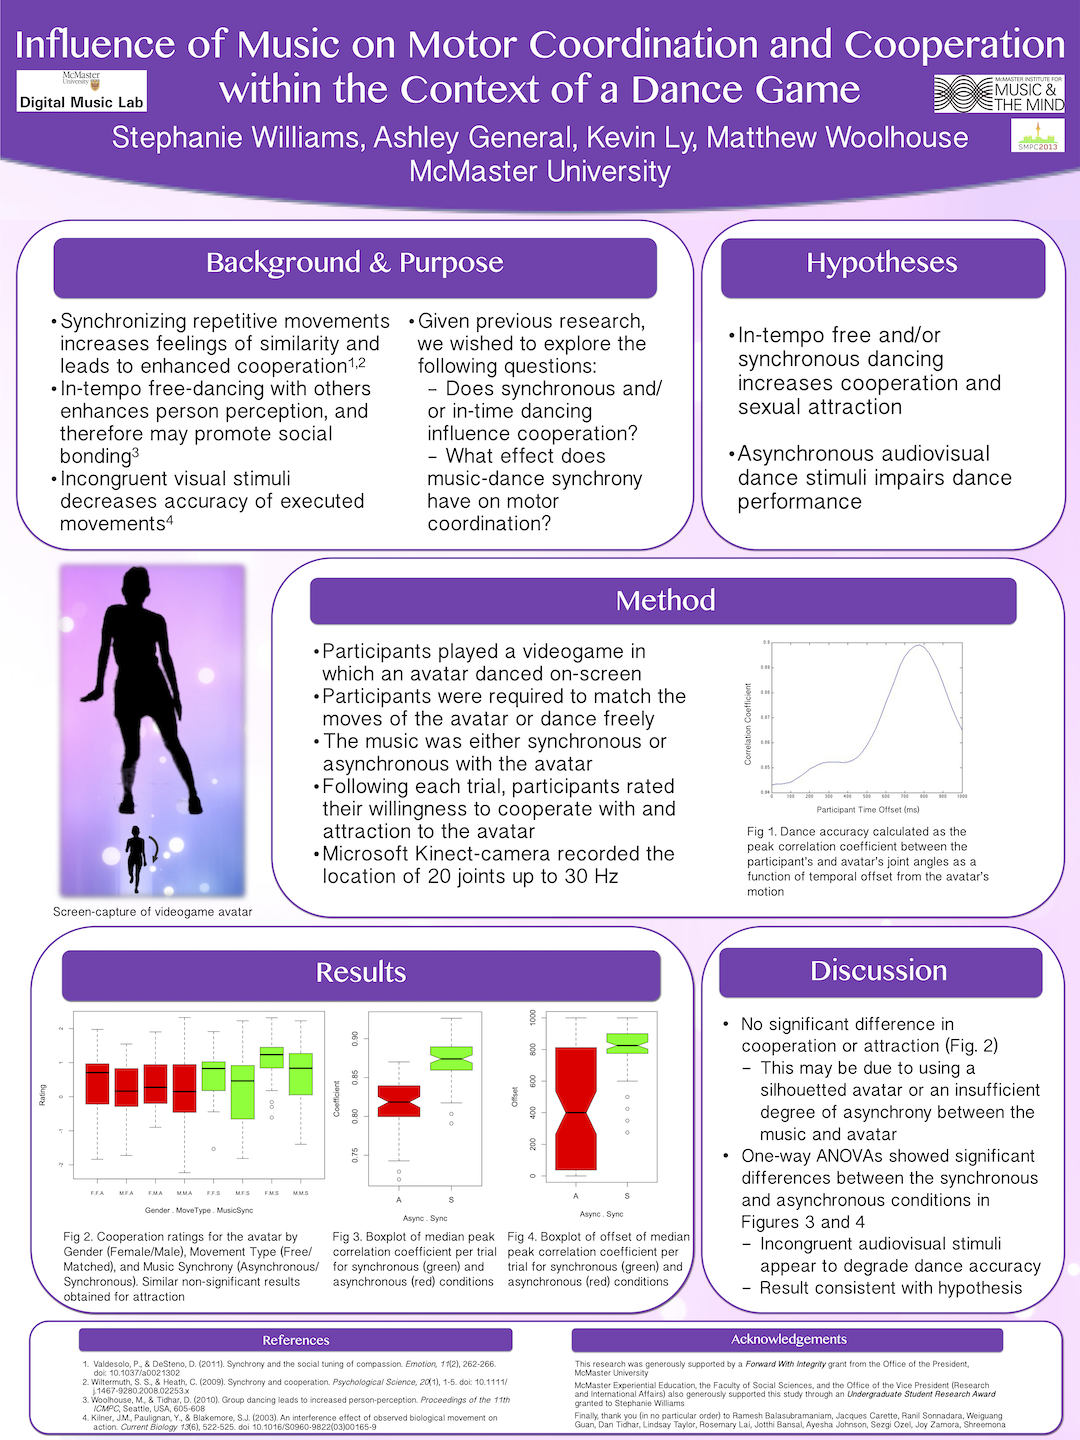 Poster for "Influence of Music on Motor Coordination and Cooperation within the Context of a Dance Game" by Stephanie Williams, Ashley General, Kevin Ly, and Matthew Woolhouse.